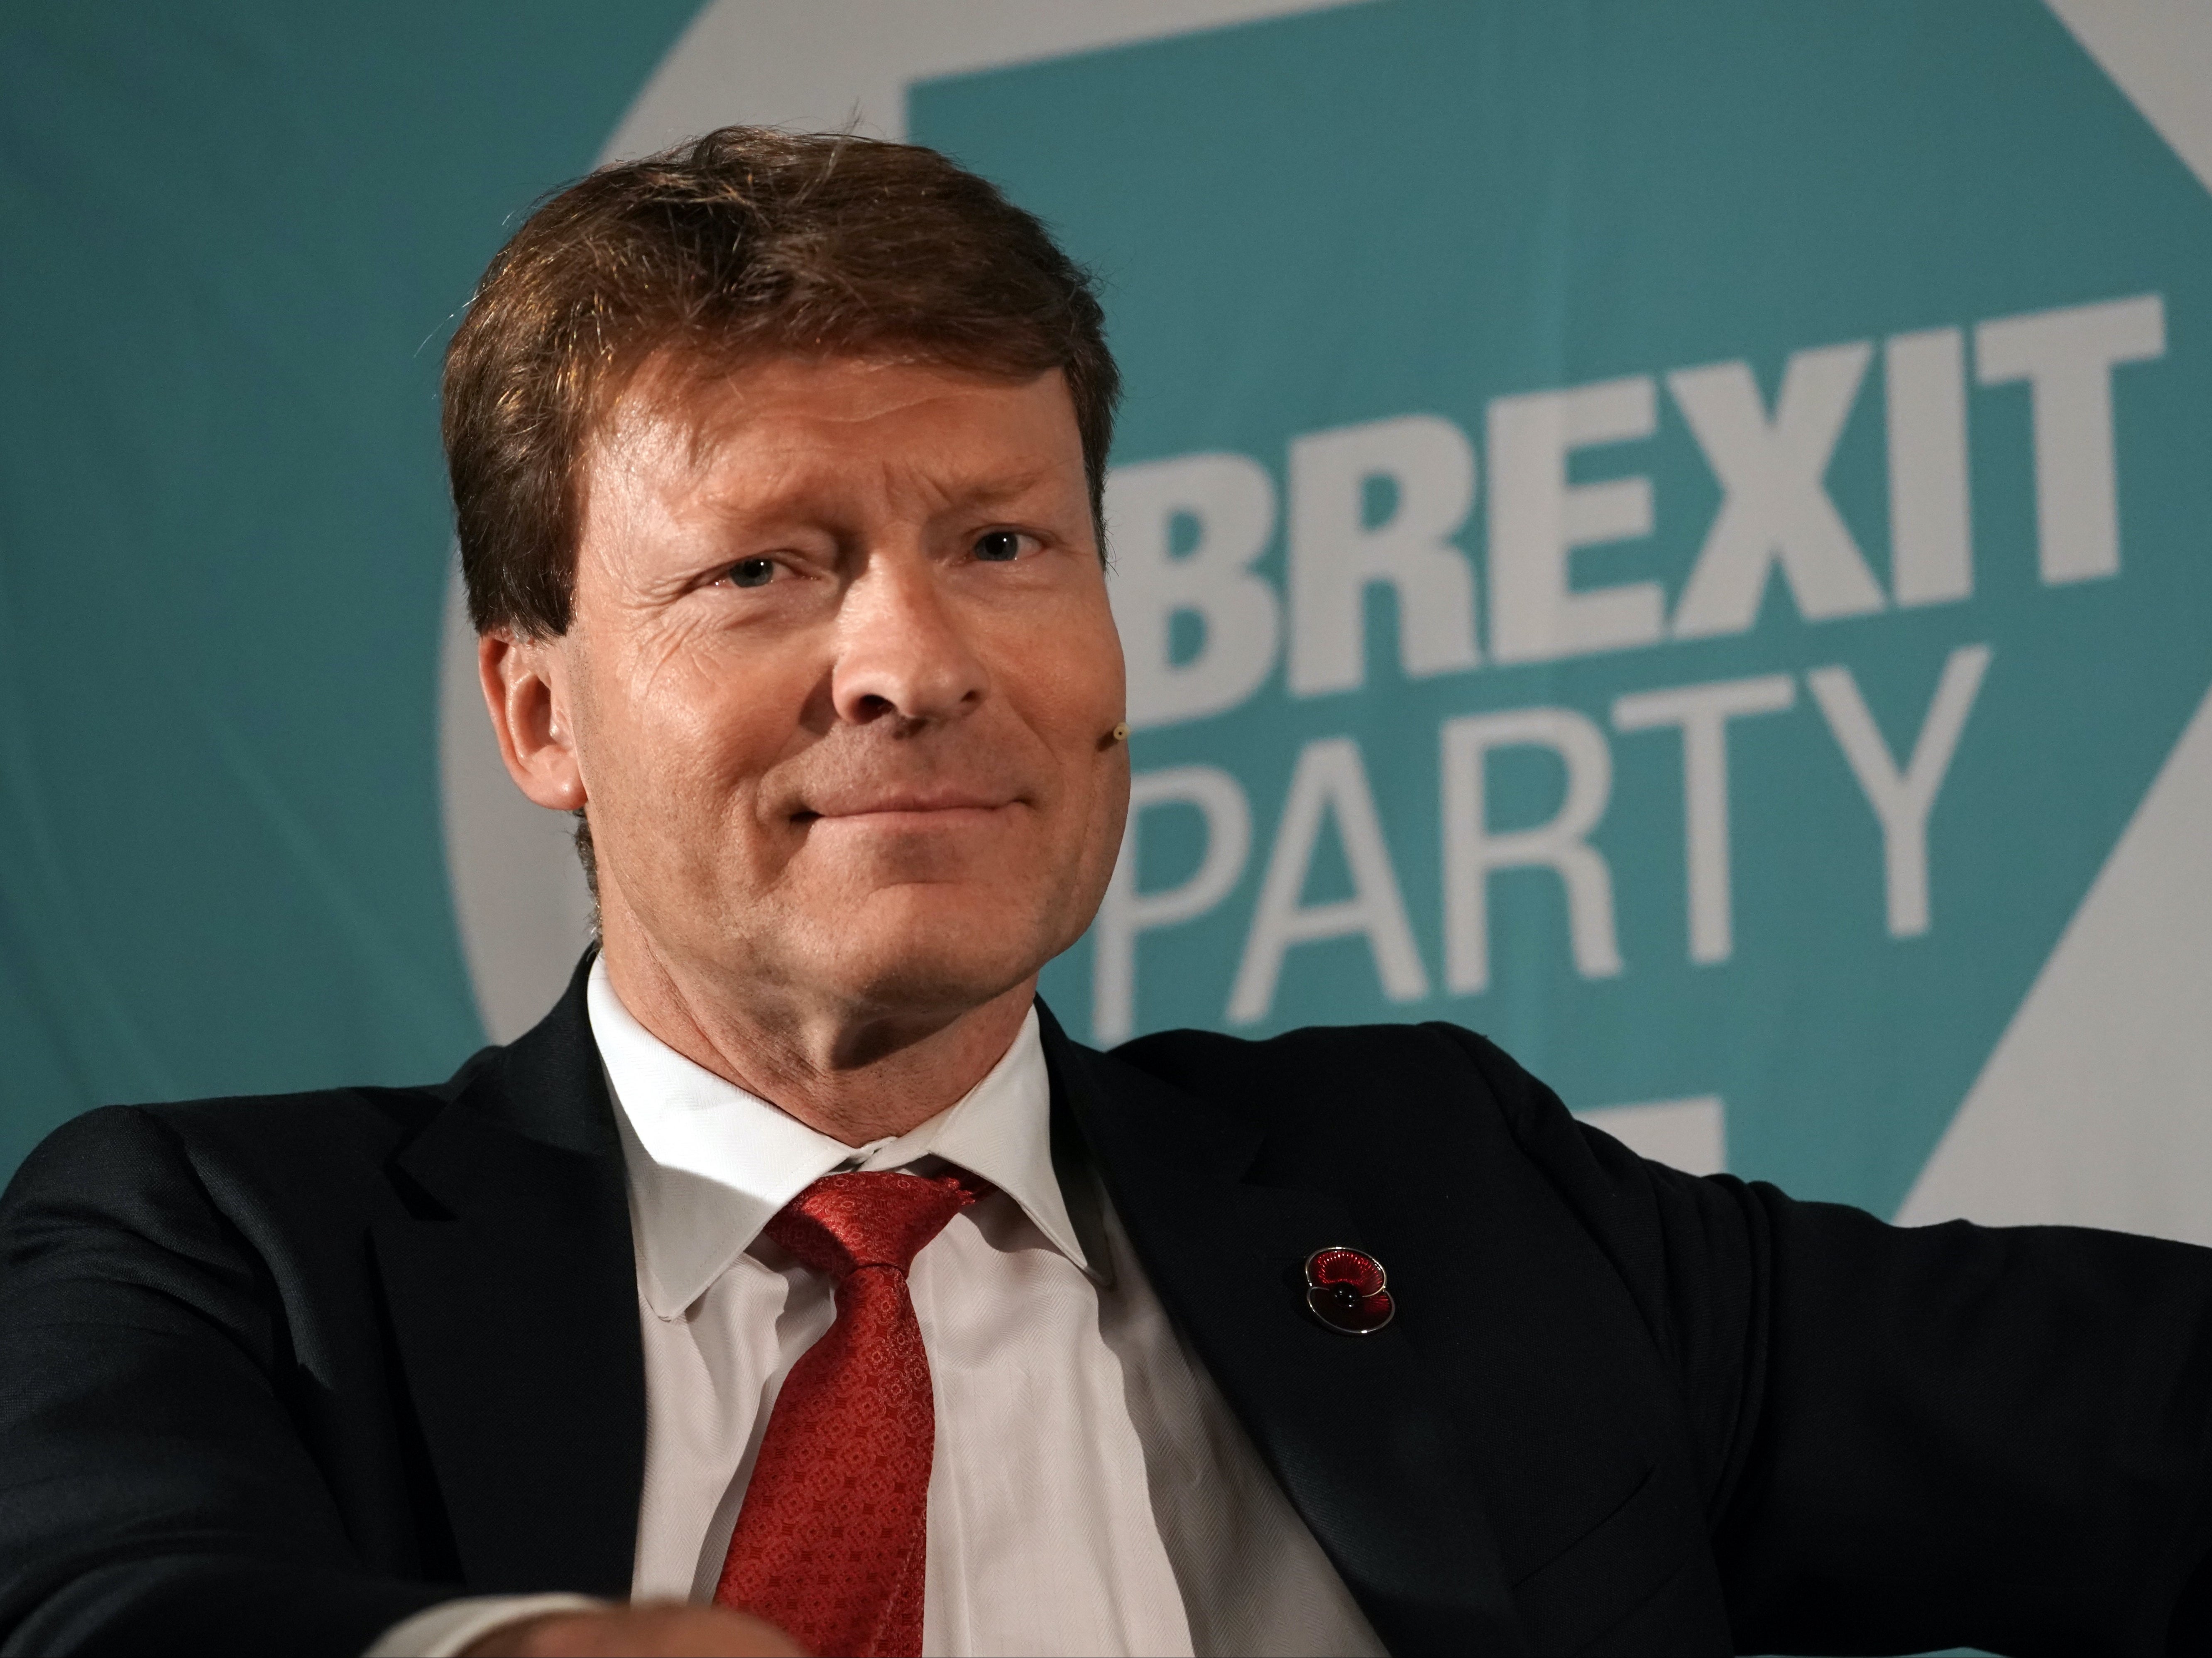 Richard Tice, leader of Brexit Party successor party Reform UK